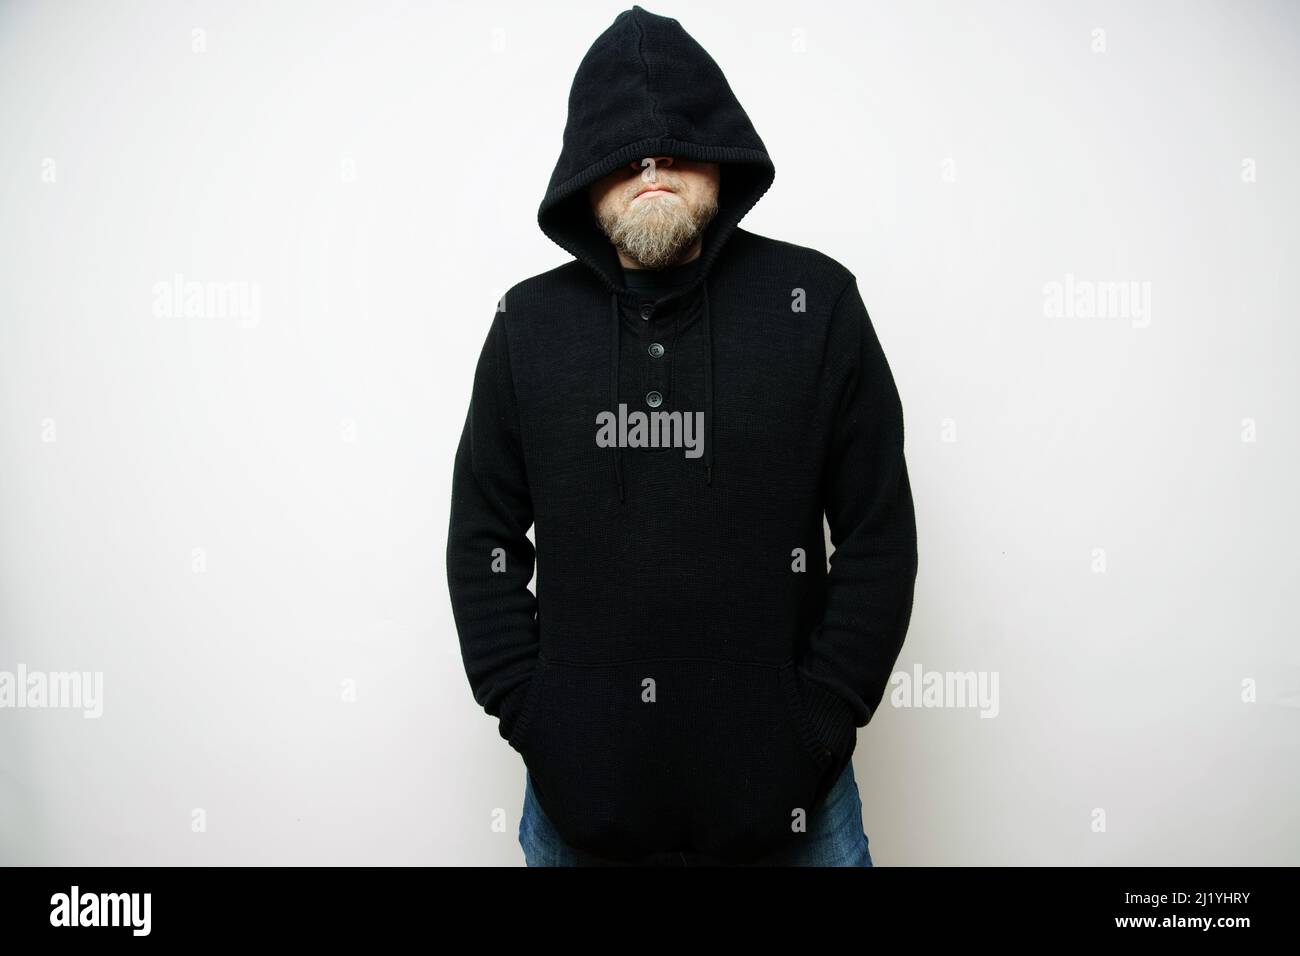 Man with a serious blond beard and a hooded sweater covering half of his face on a light background Stock Photo